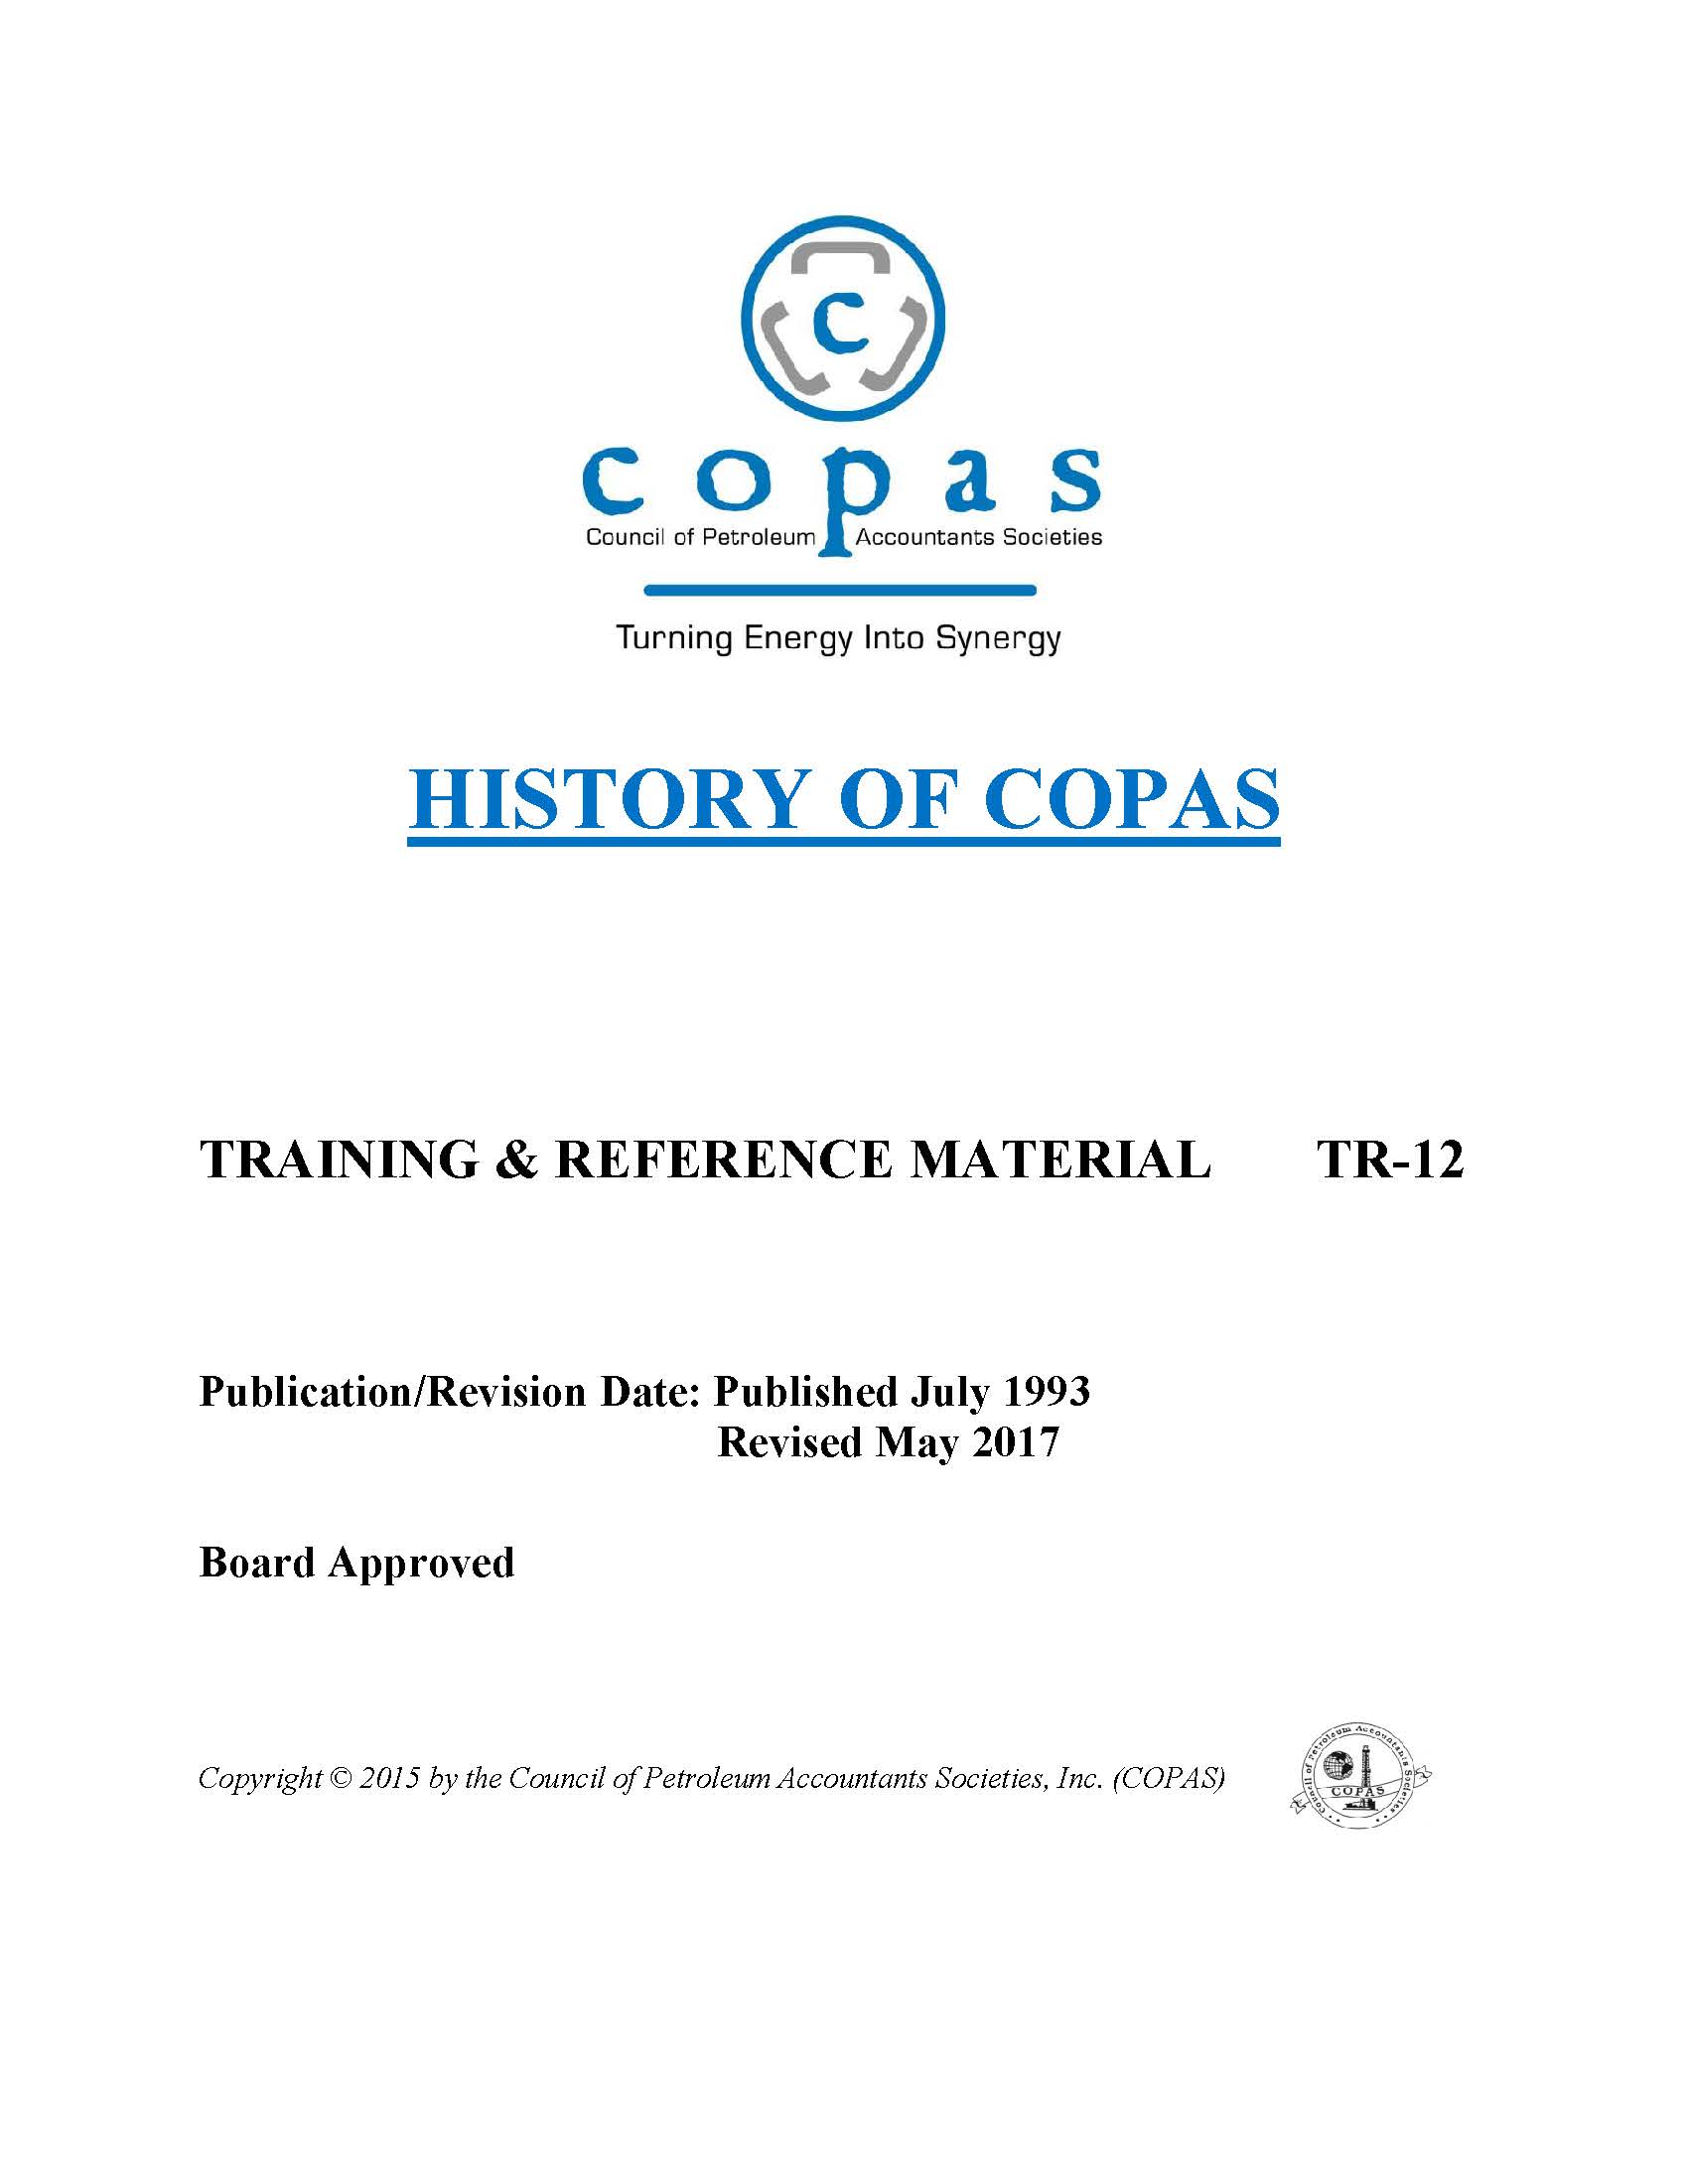 TR-12 History of COPAS - products TR 12 History of COPAS 05.09.17 - Council of Petroleum Accountants Societies